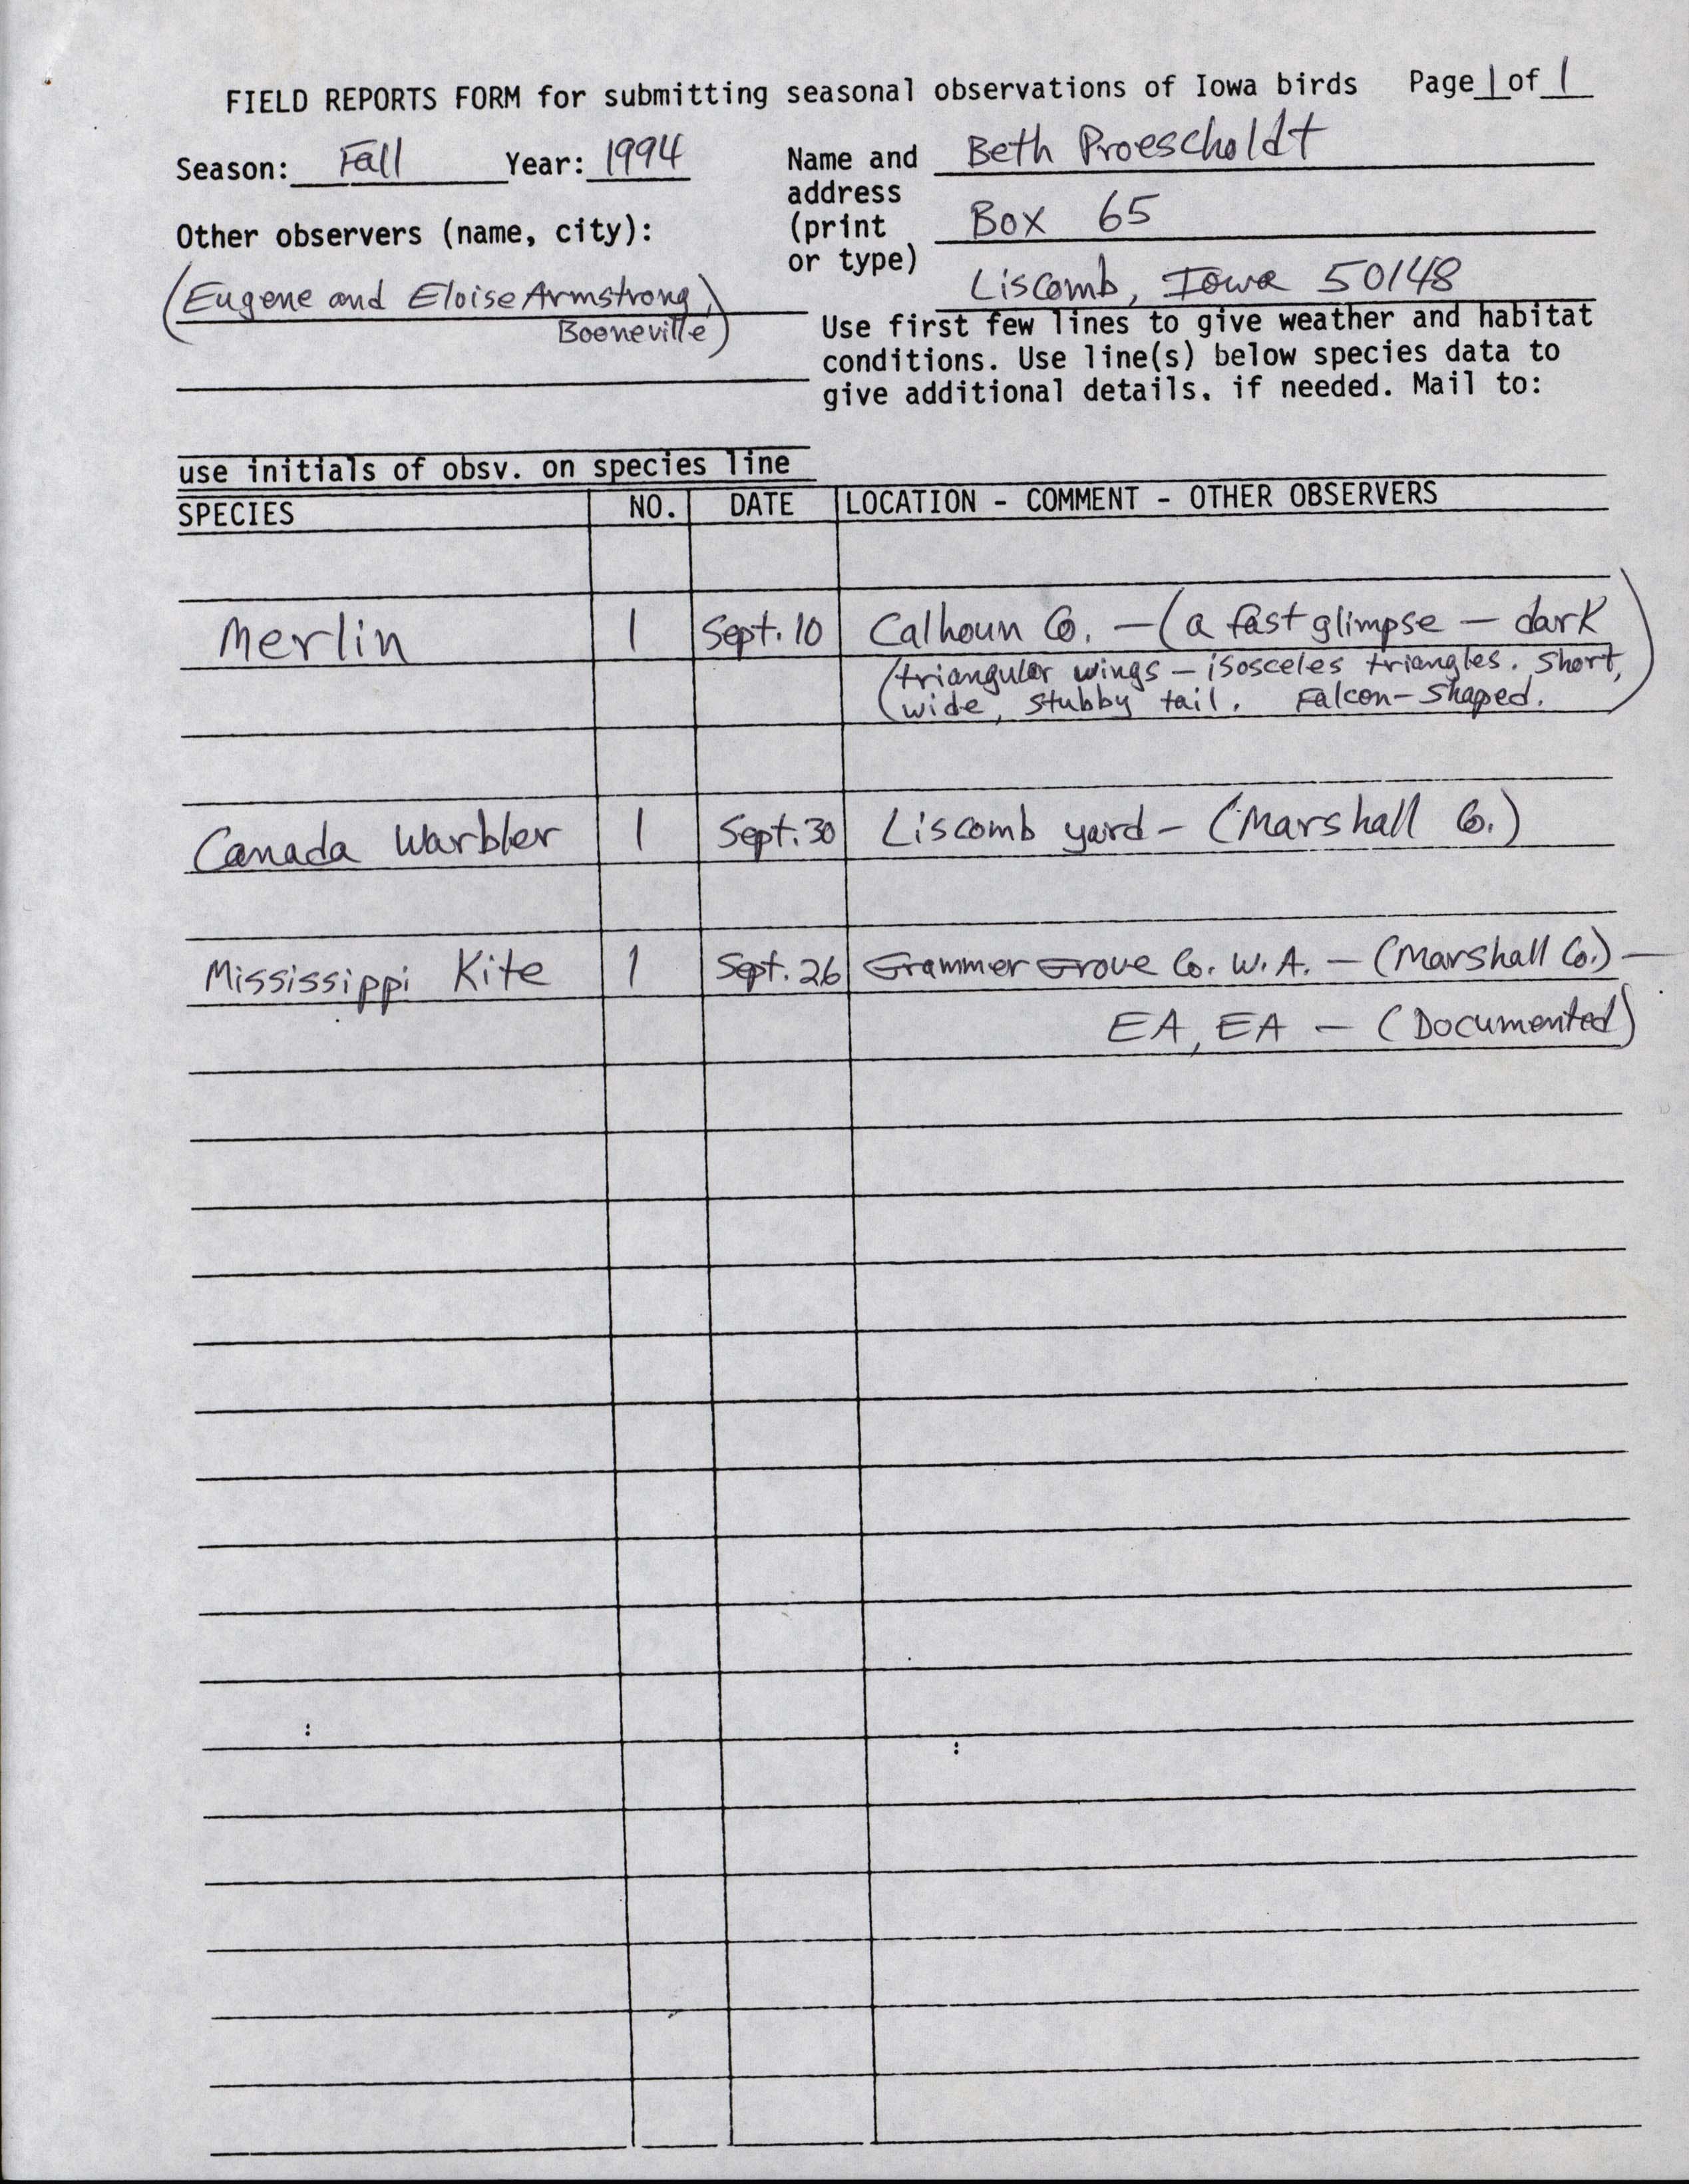 Field reports form for submitting seasonal observations of Iowa birds, Beth Proescholdt, fall 1994